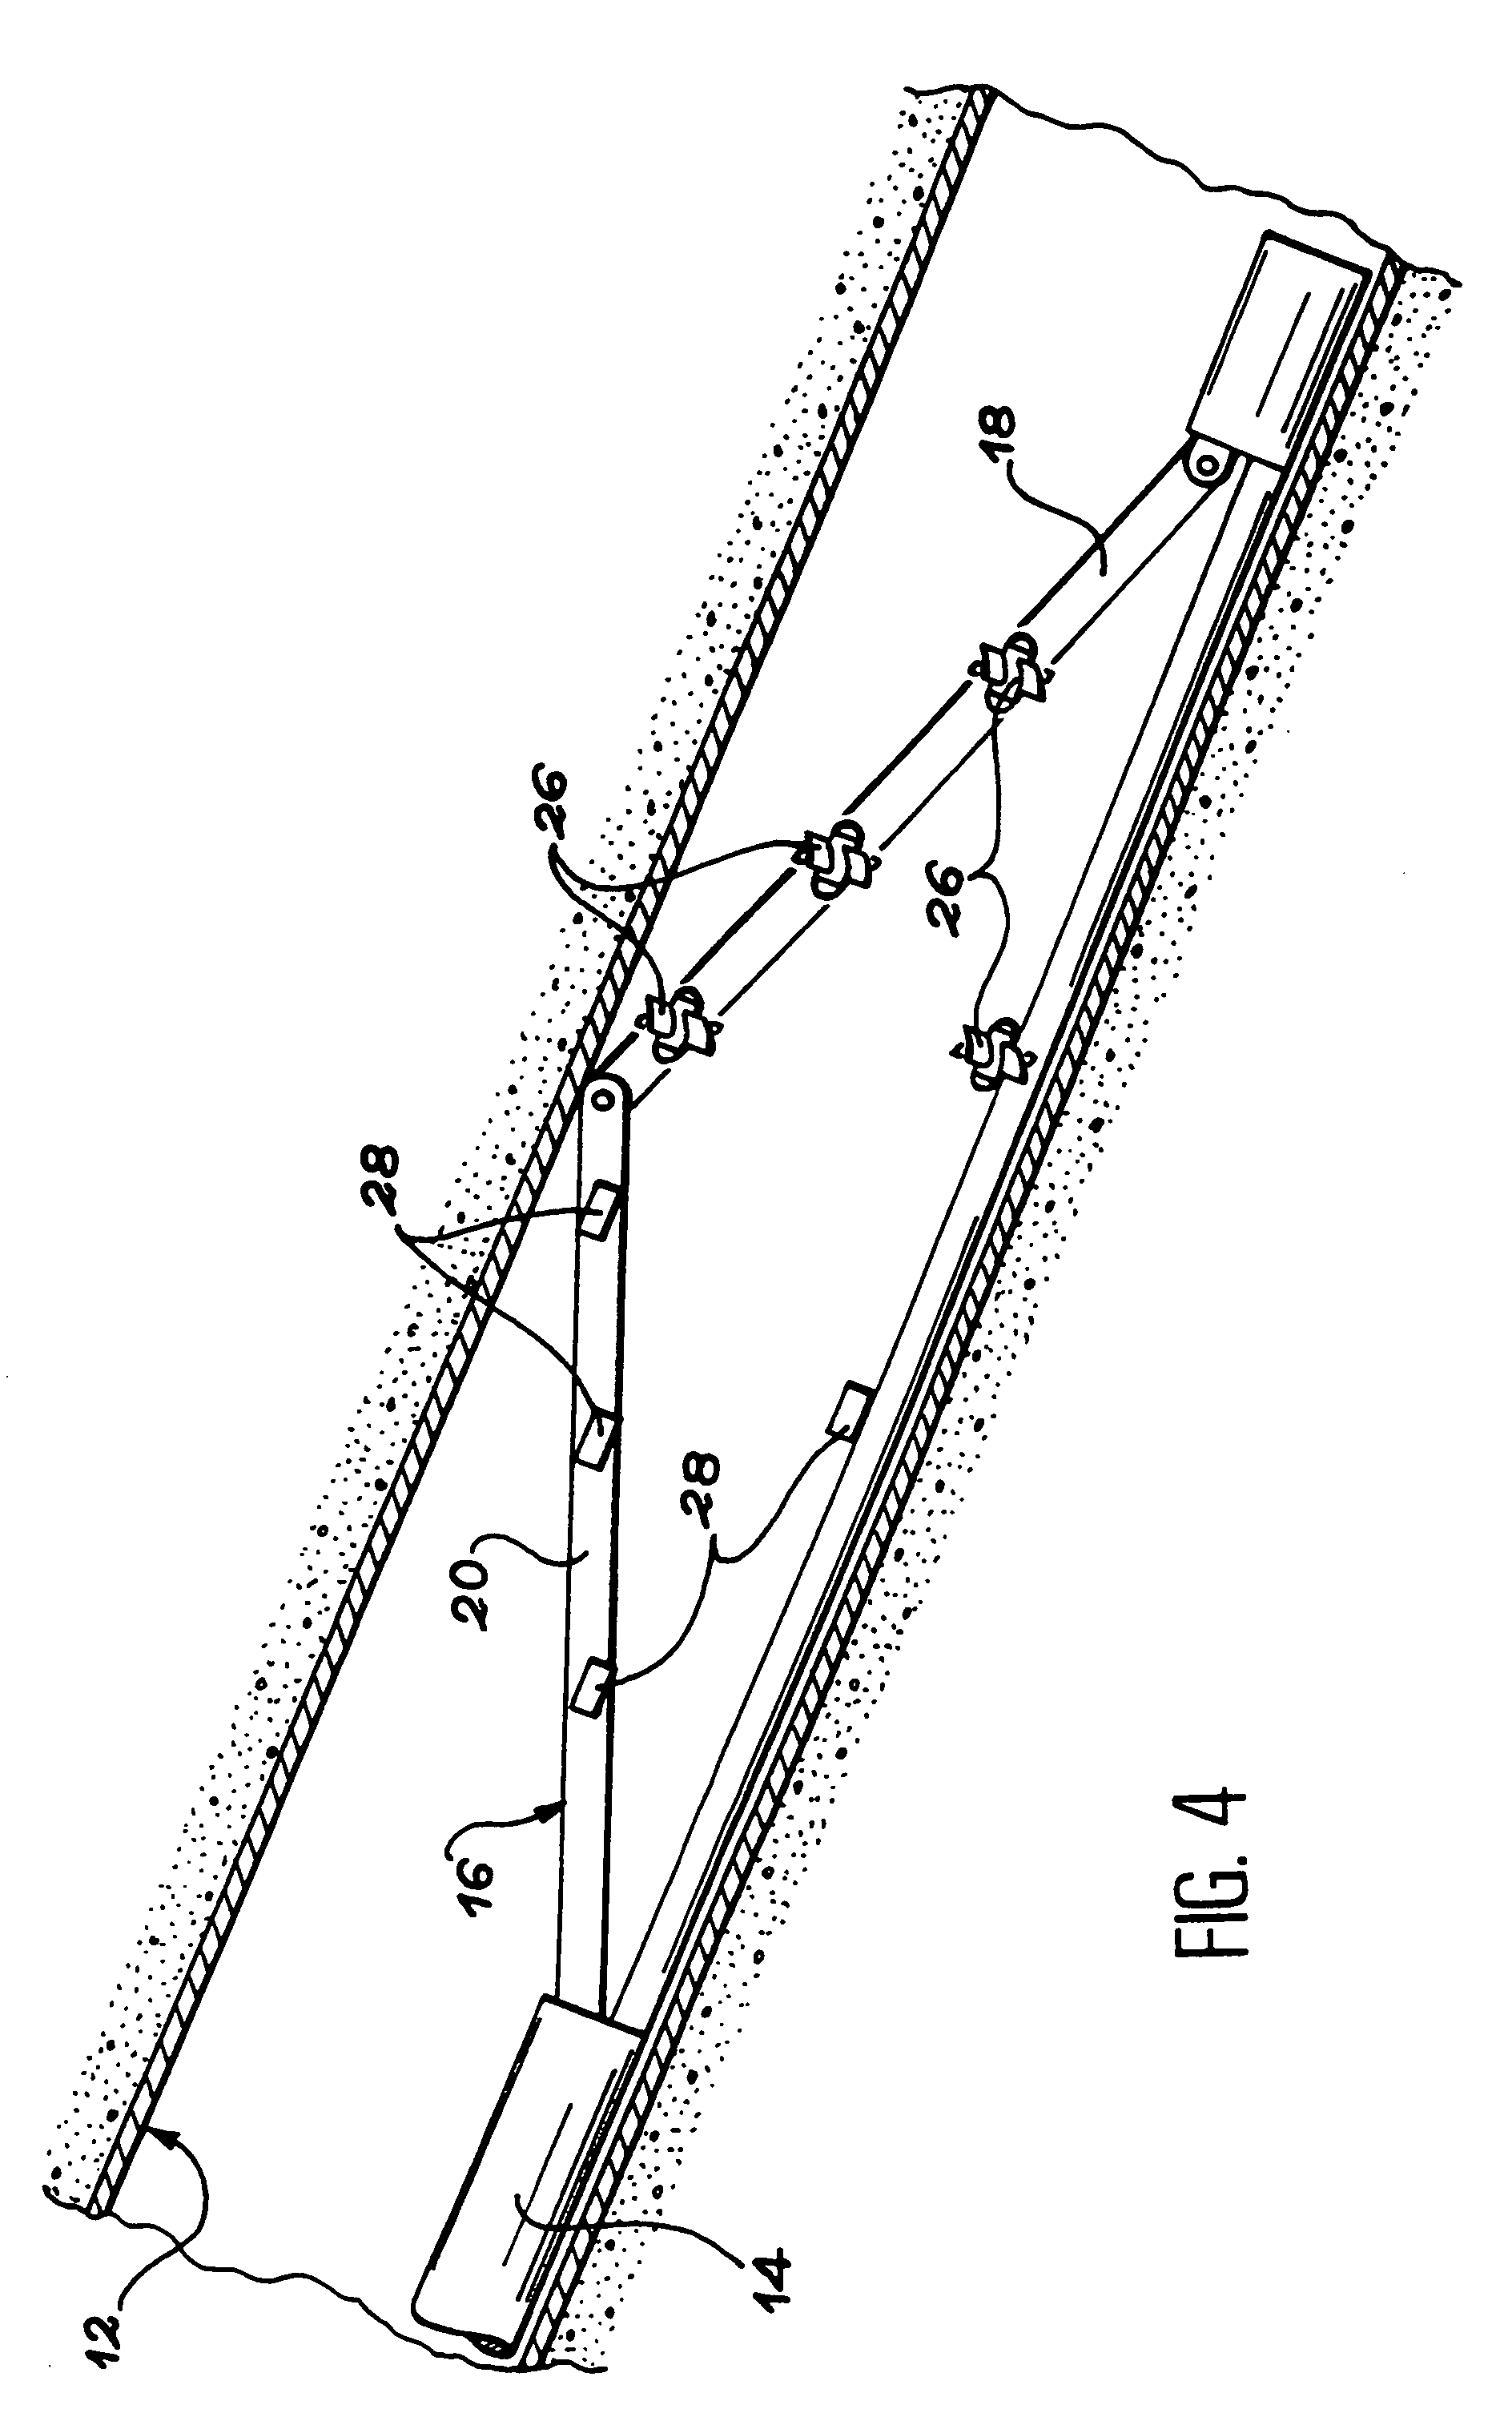 Method and apparatus for acquiring data in a hydrocarbon well in production